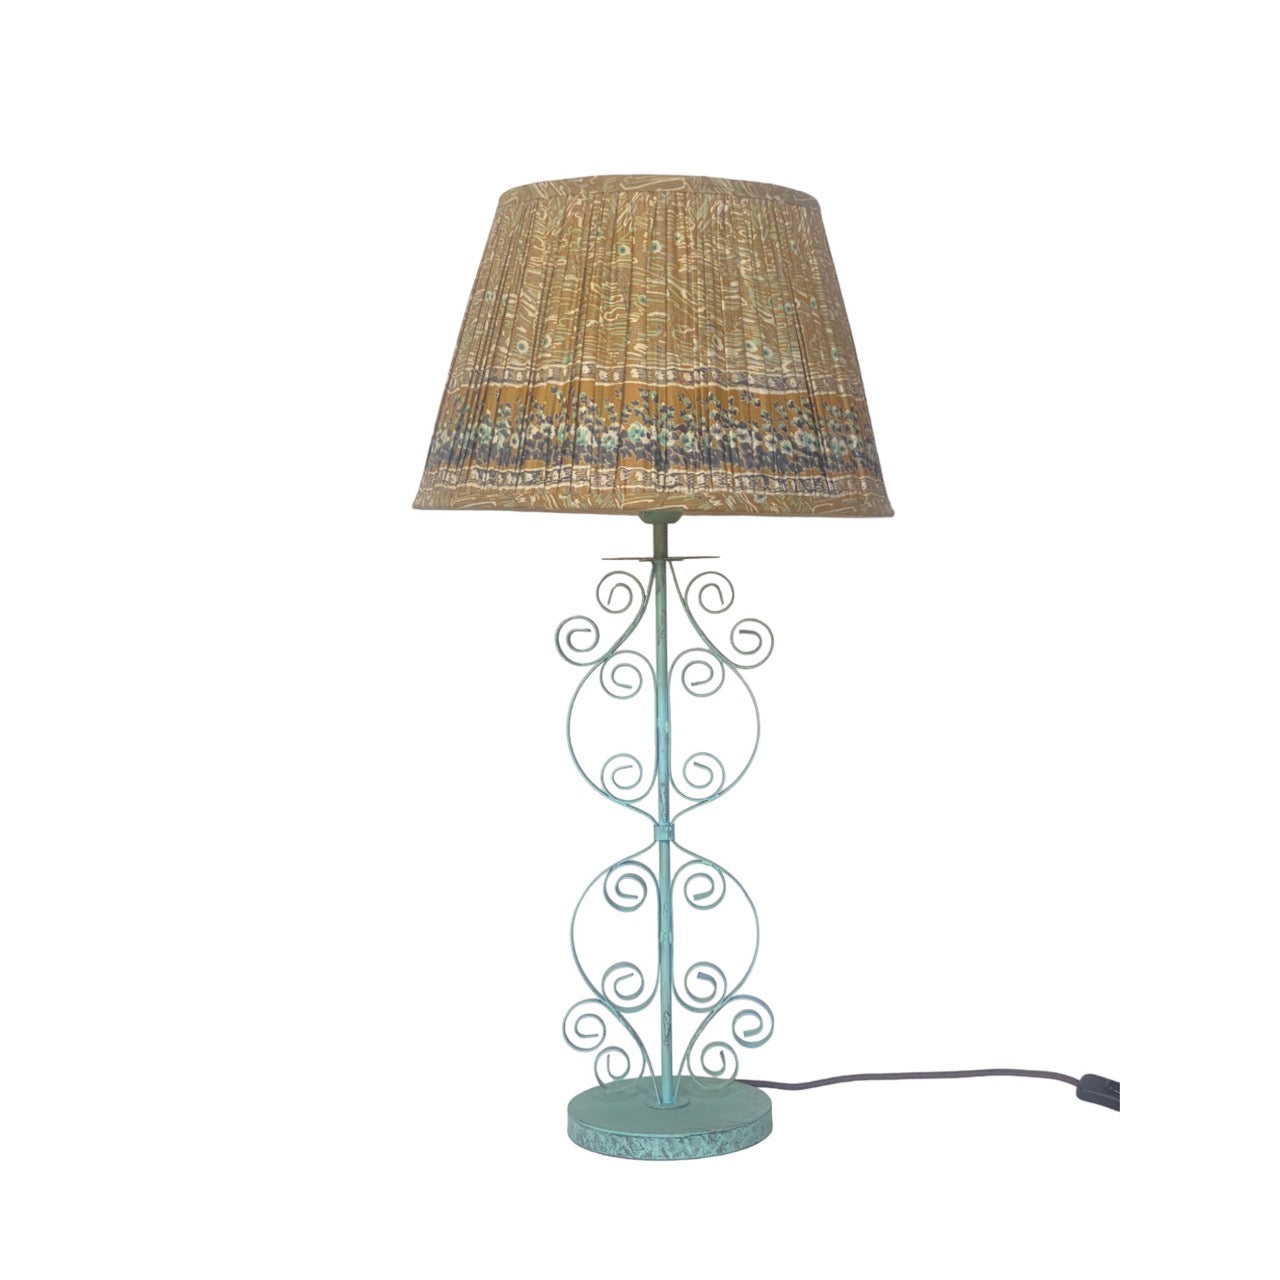 Manali curly table lamp with khaki peacock lampshade